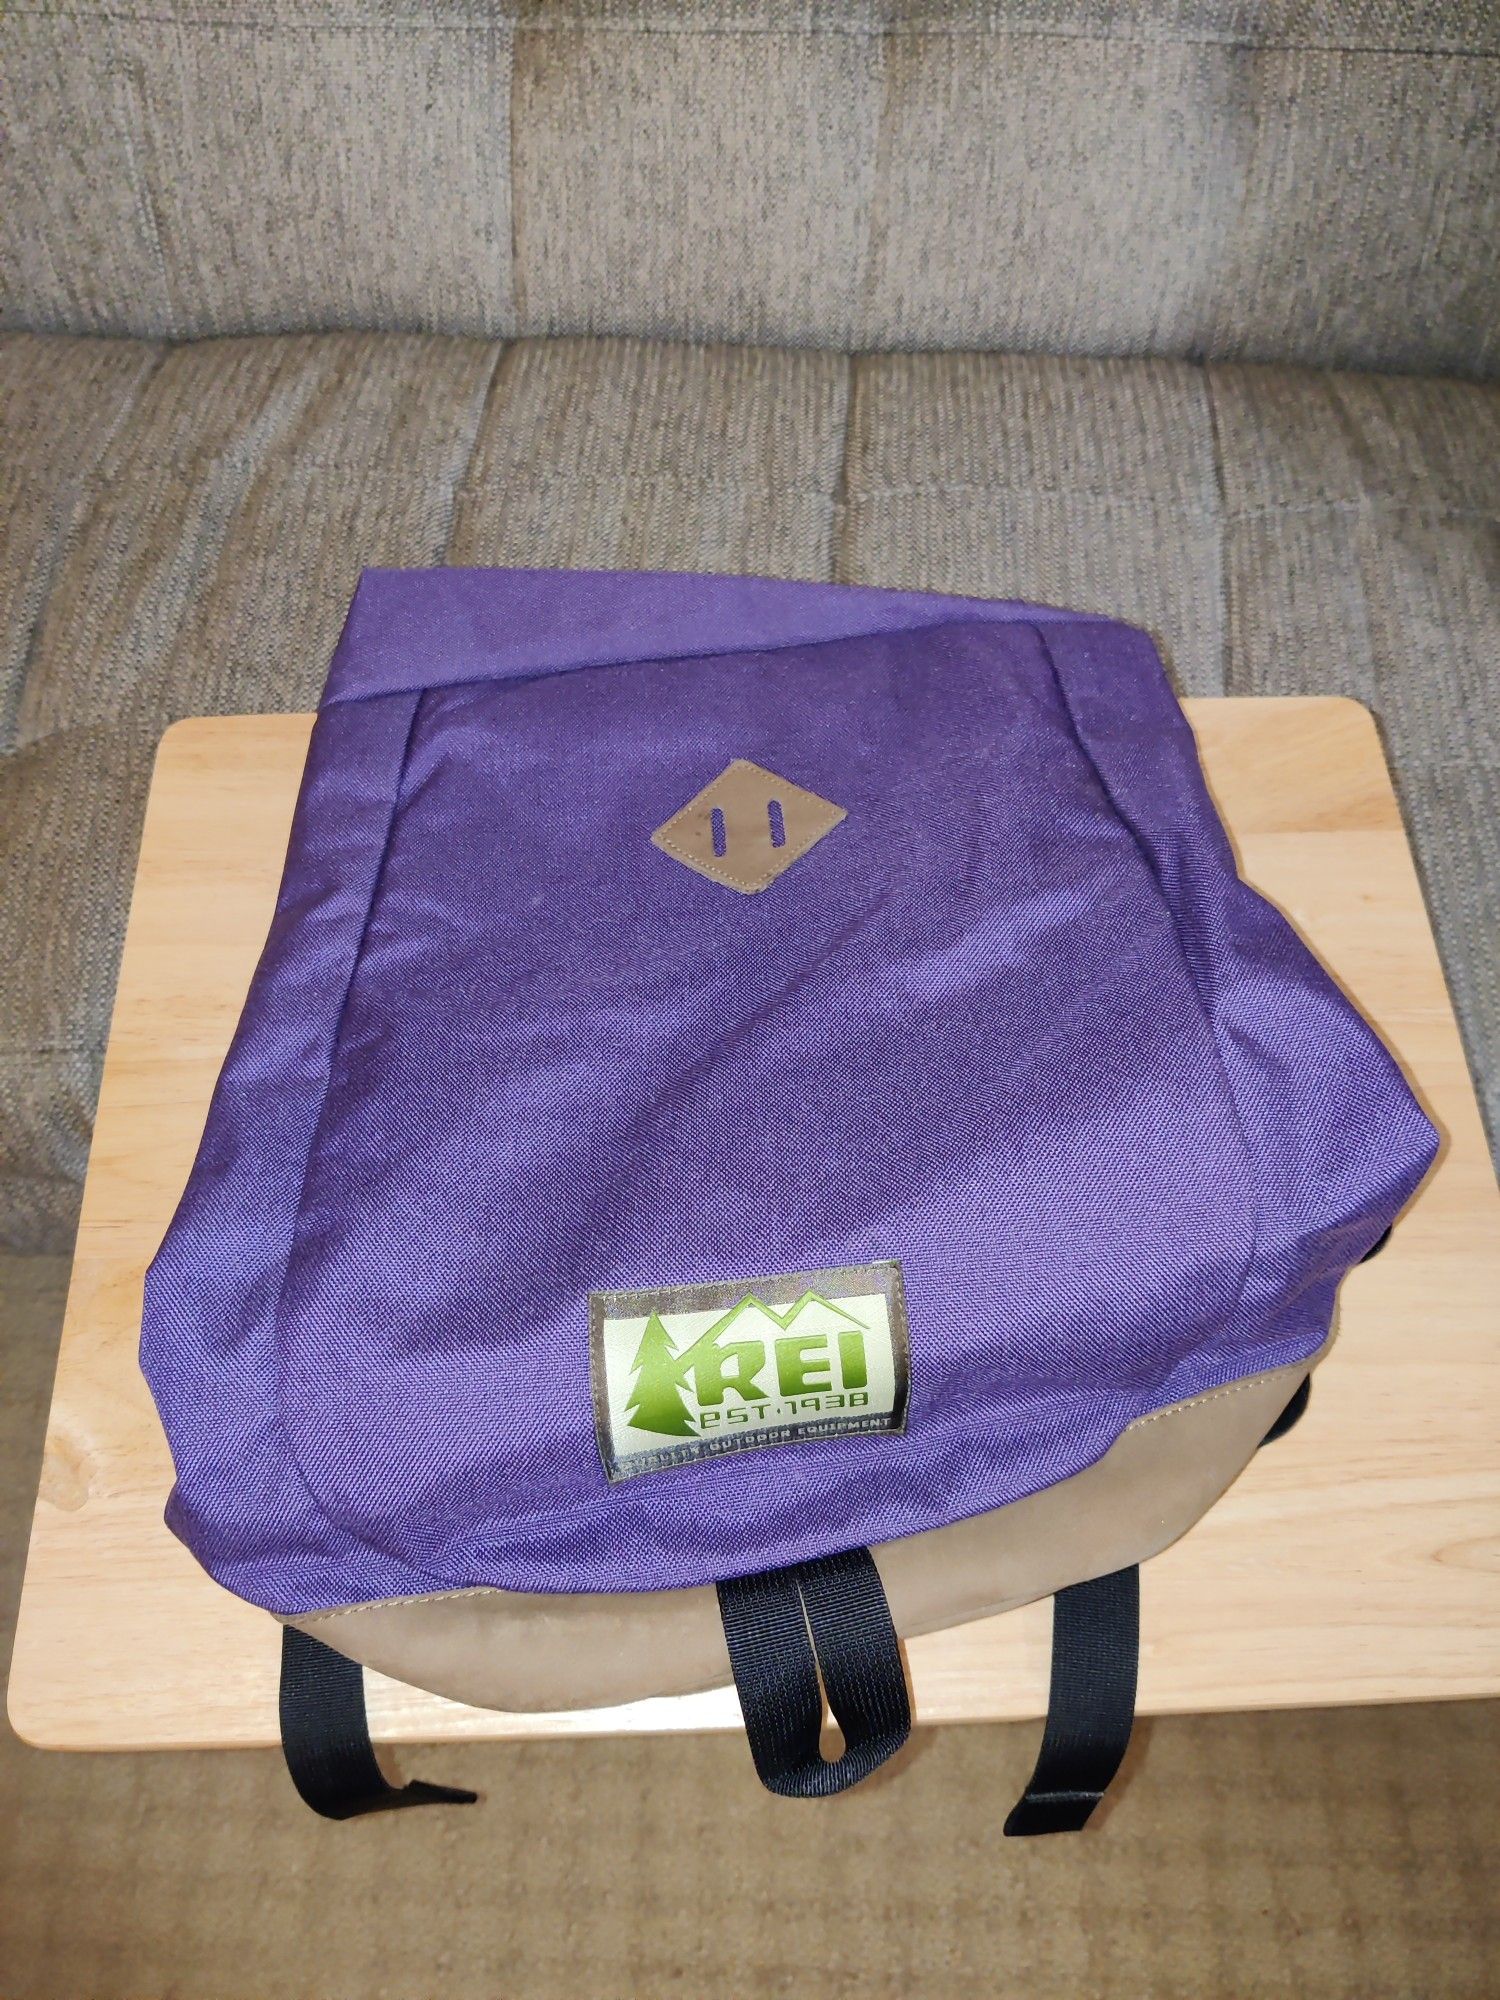 Used REI backpack